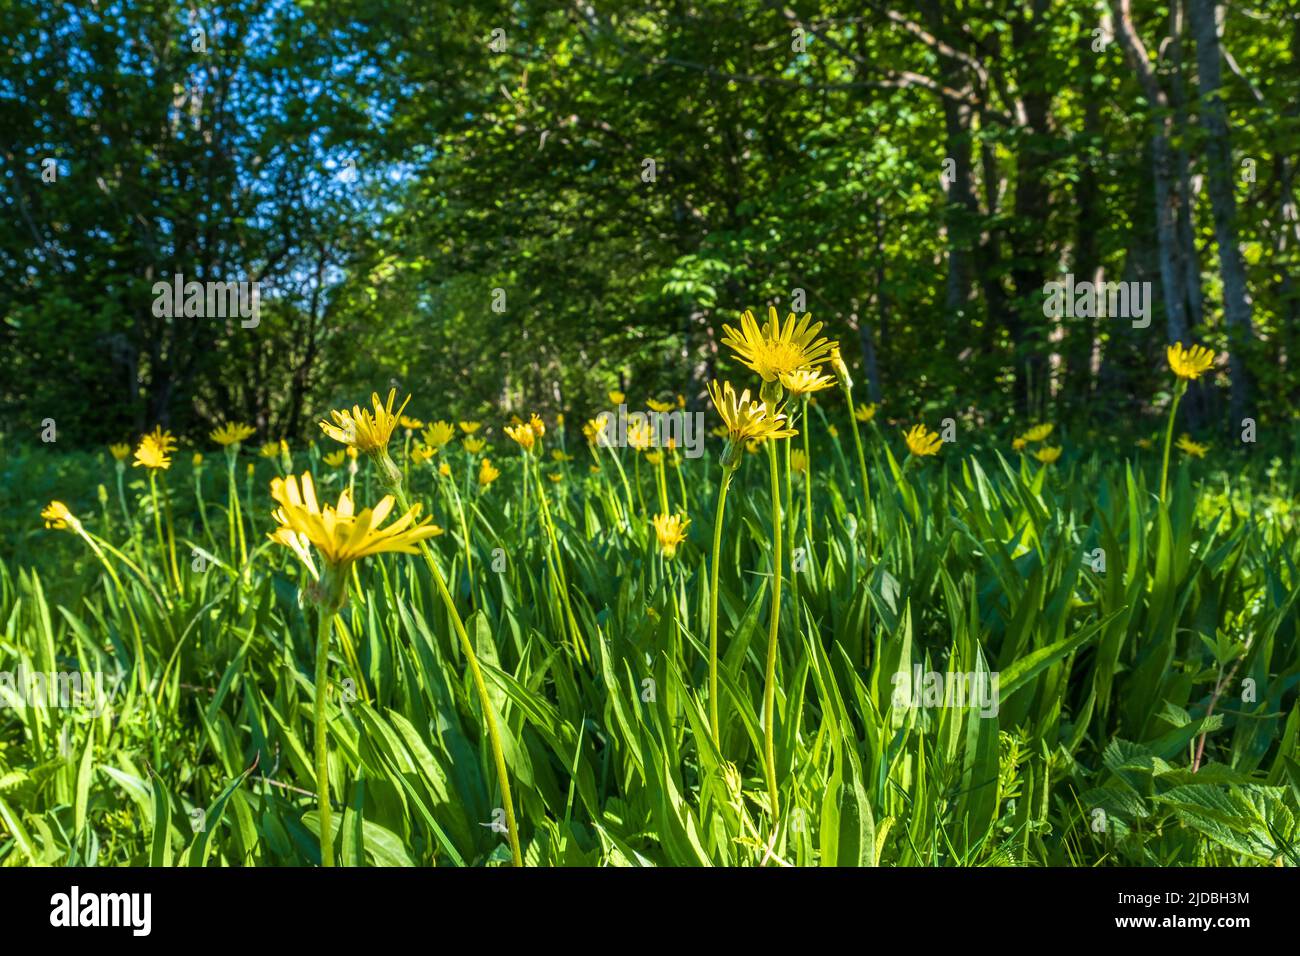 Blooming Viper's-grass flowers at a shady forest edge Stock Photo